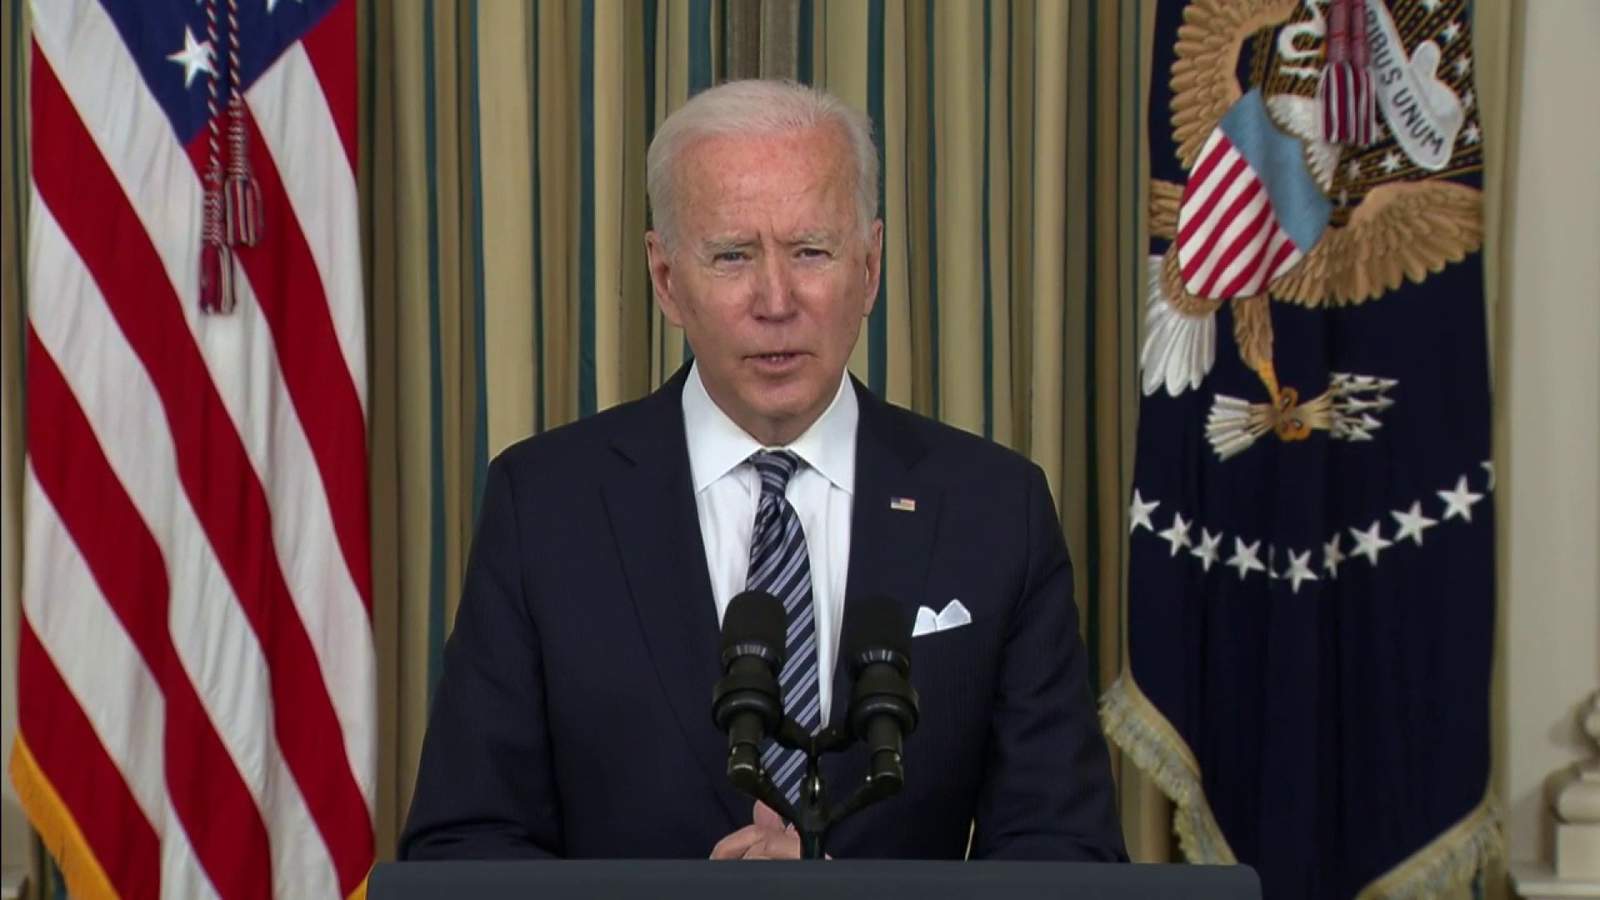 Biden administration kicks off ‘Help is Here’ tour to promote COVID recovery plan